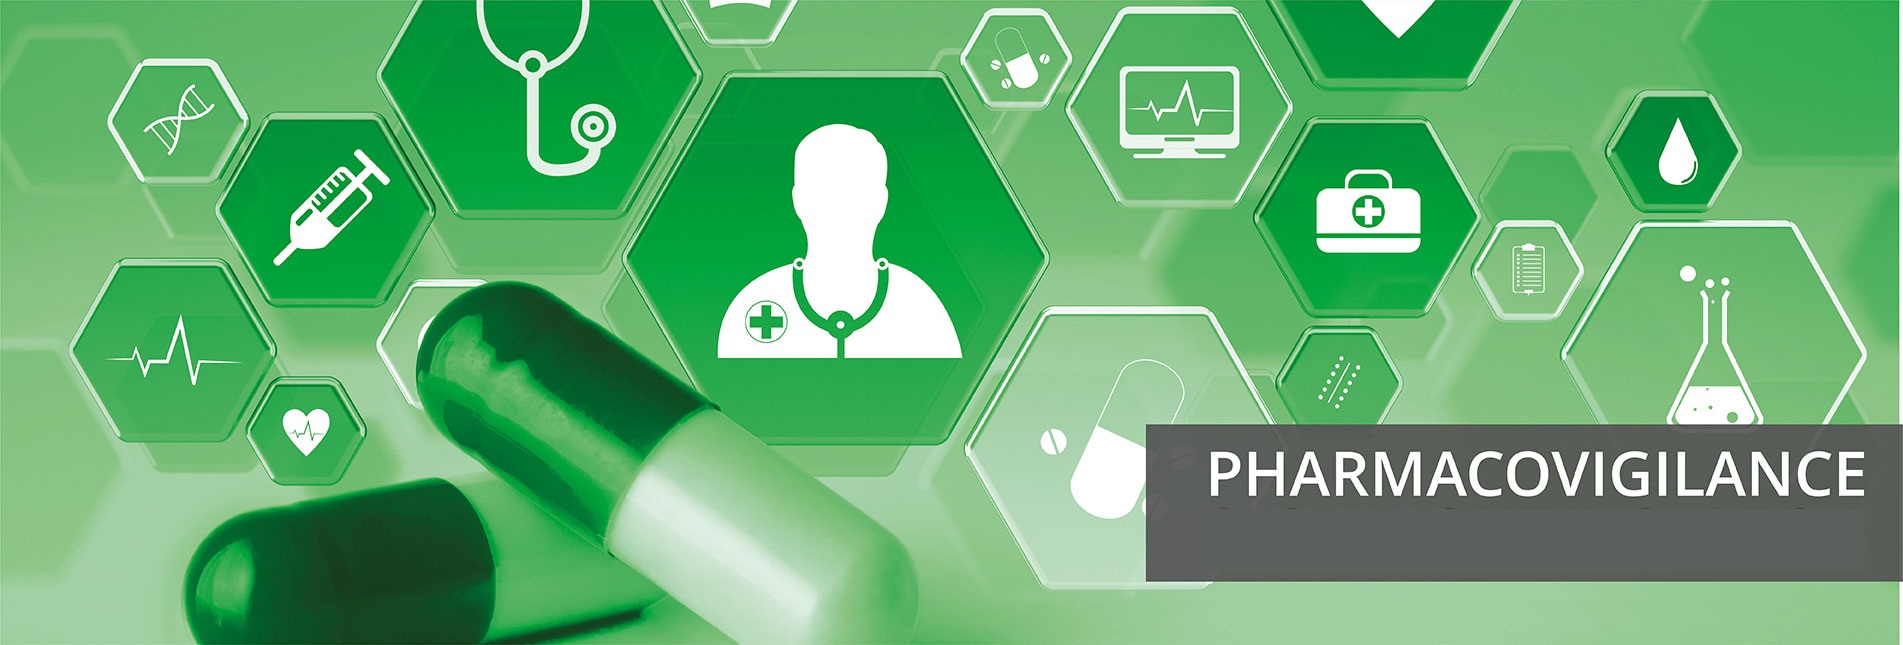 Pharmacovigilance Market Trends to Register Striking Growth As Manufacturers Bring New Innovative Products to Downstream Processes